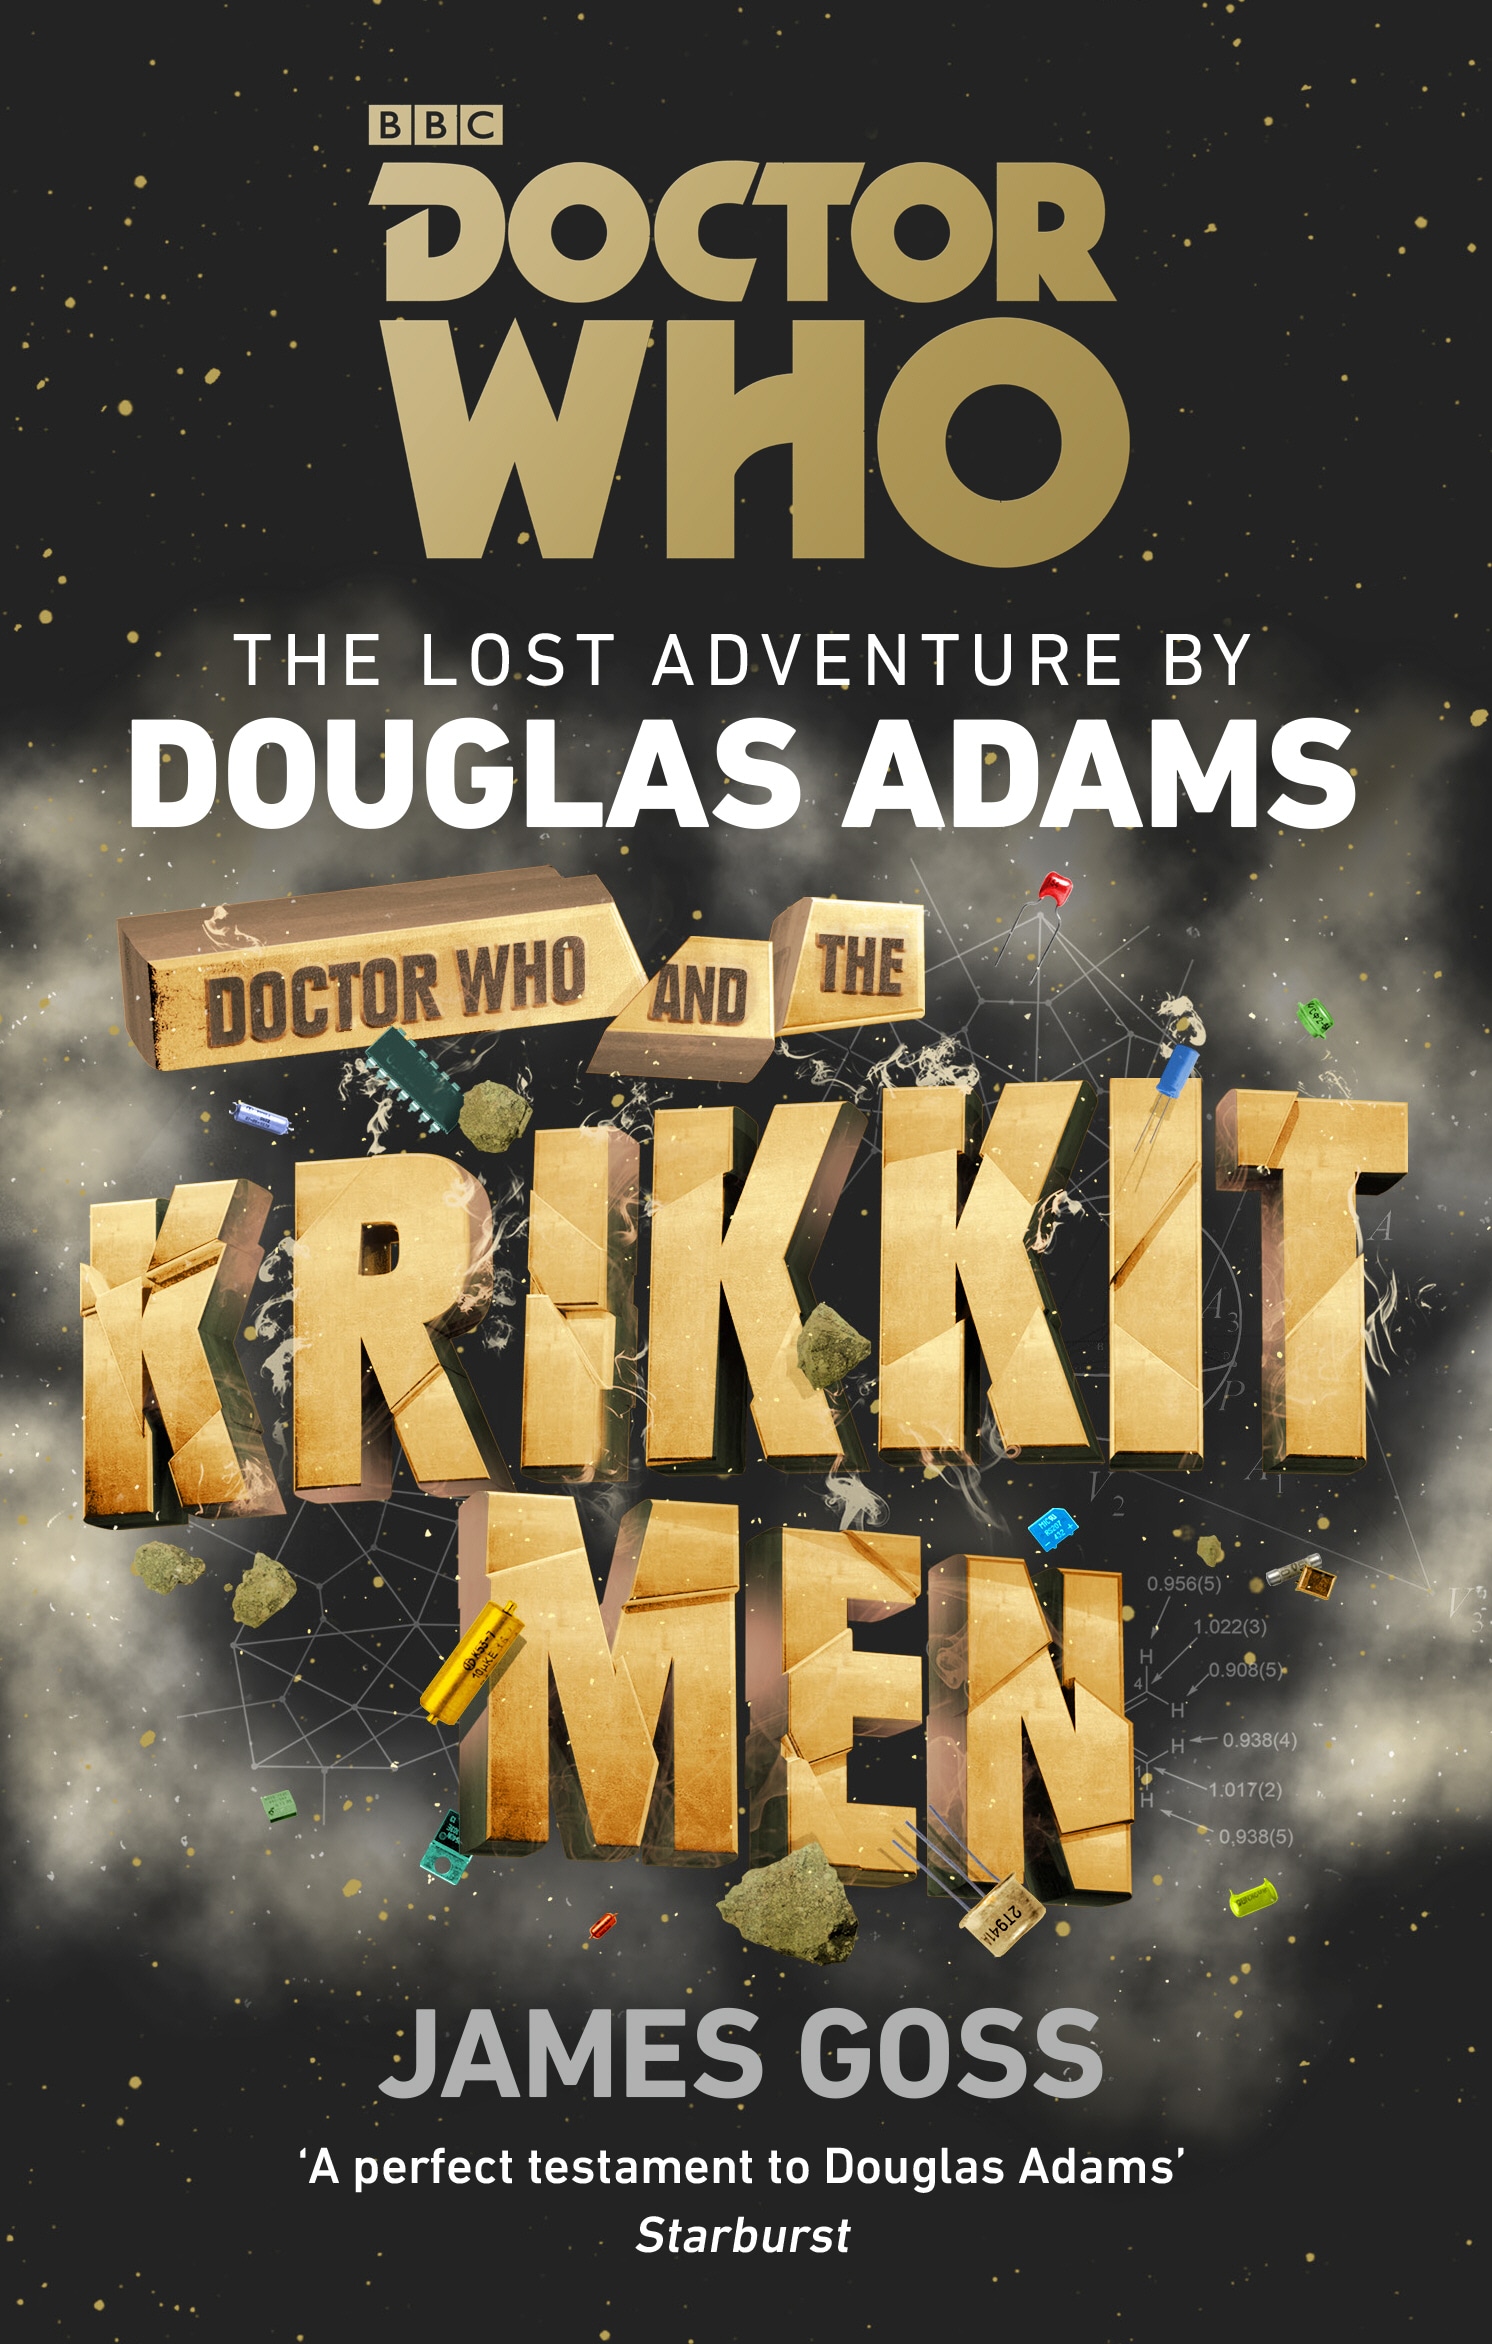 Book “Doctor Who and the Krikkitmen” by Douglas Adams, James Goss — February 14, 2019